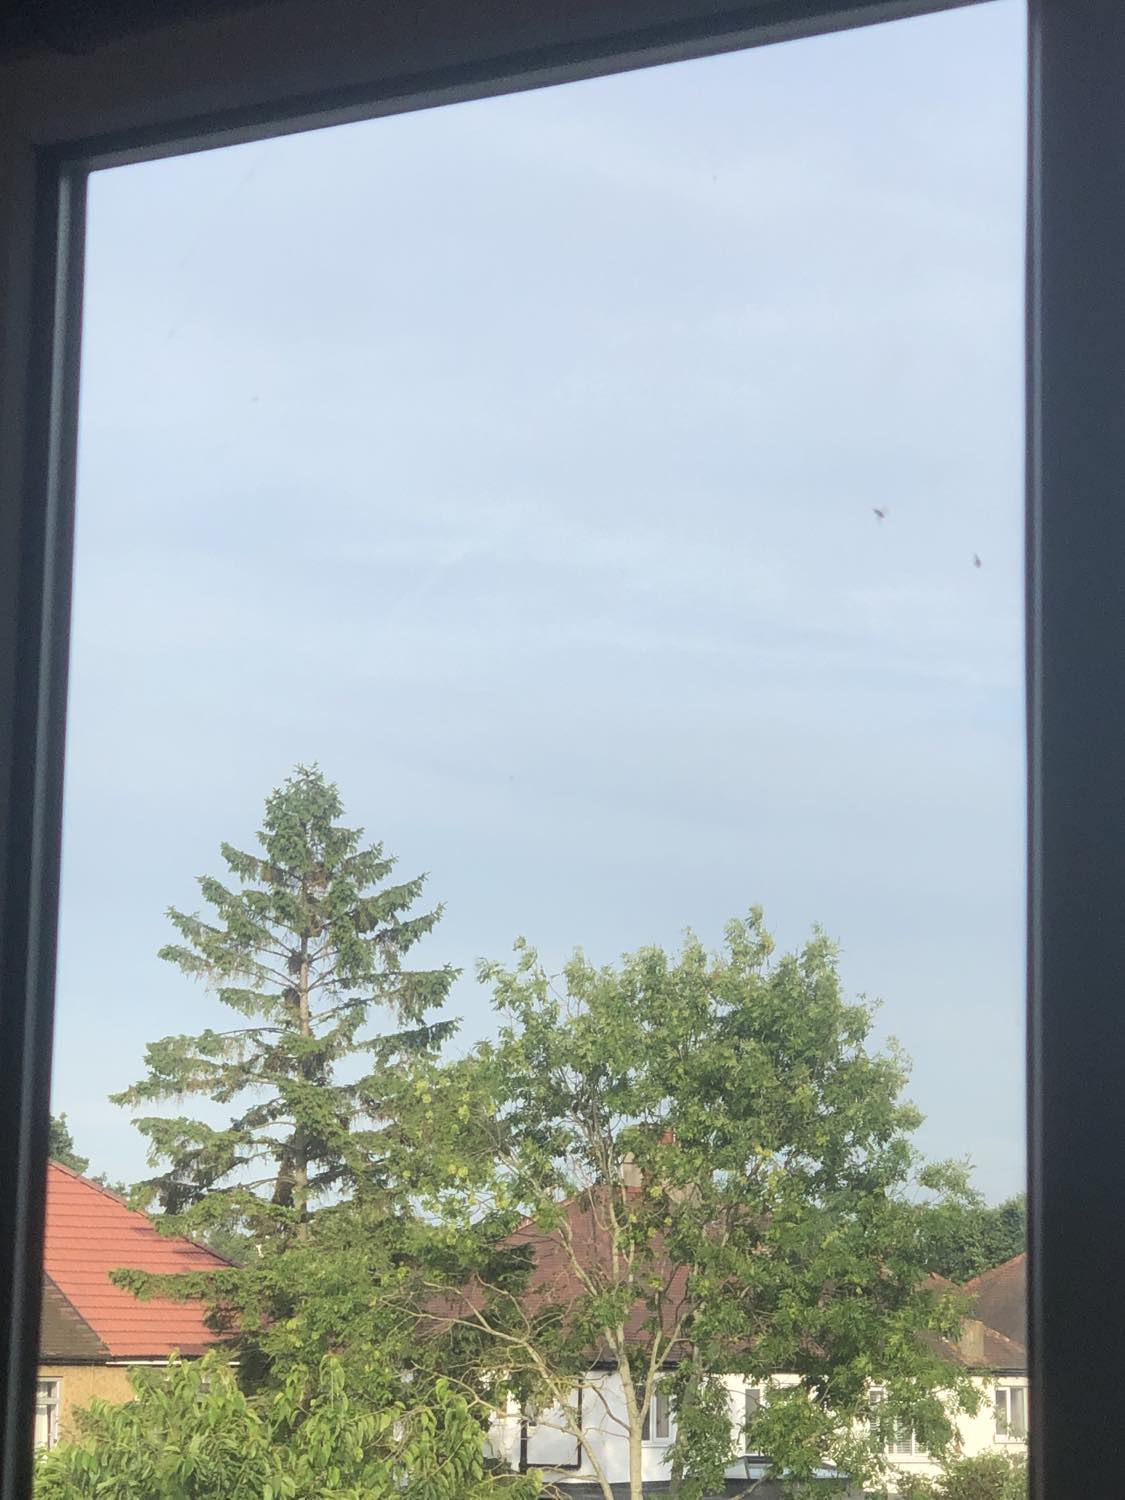 Two flies dancing close to eachother outside the window, with trees off in the background